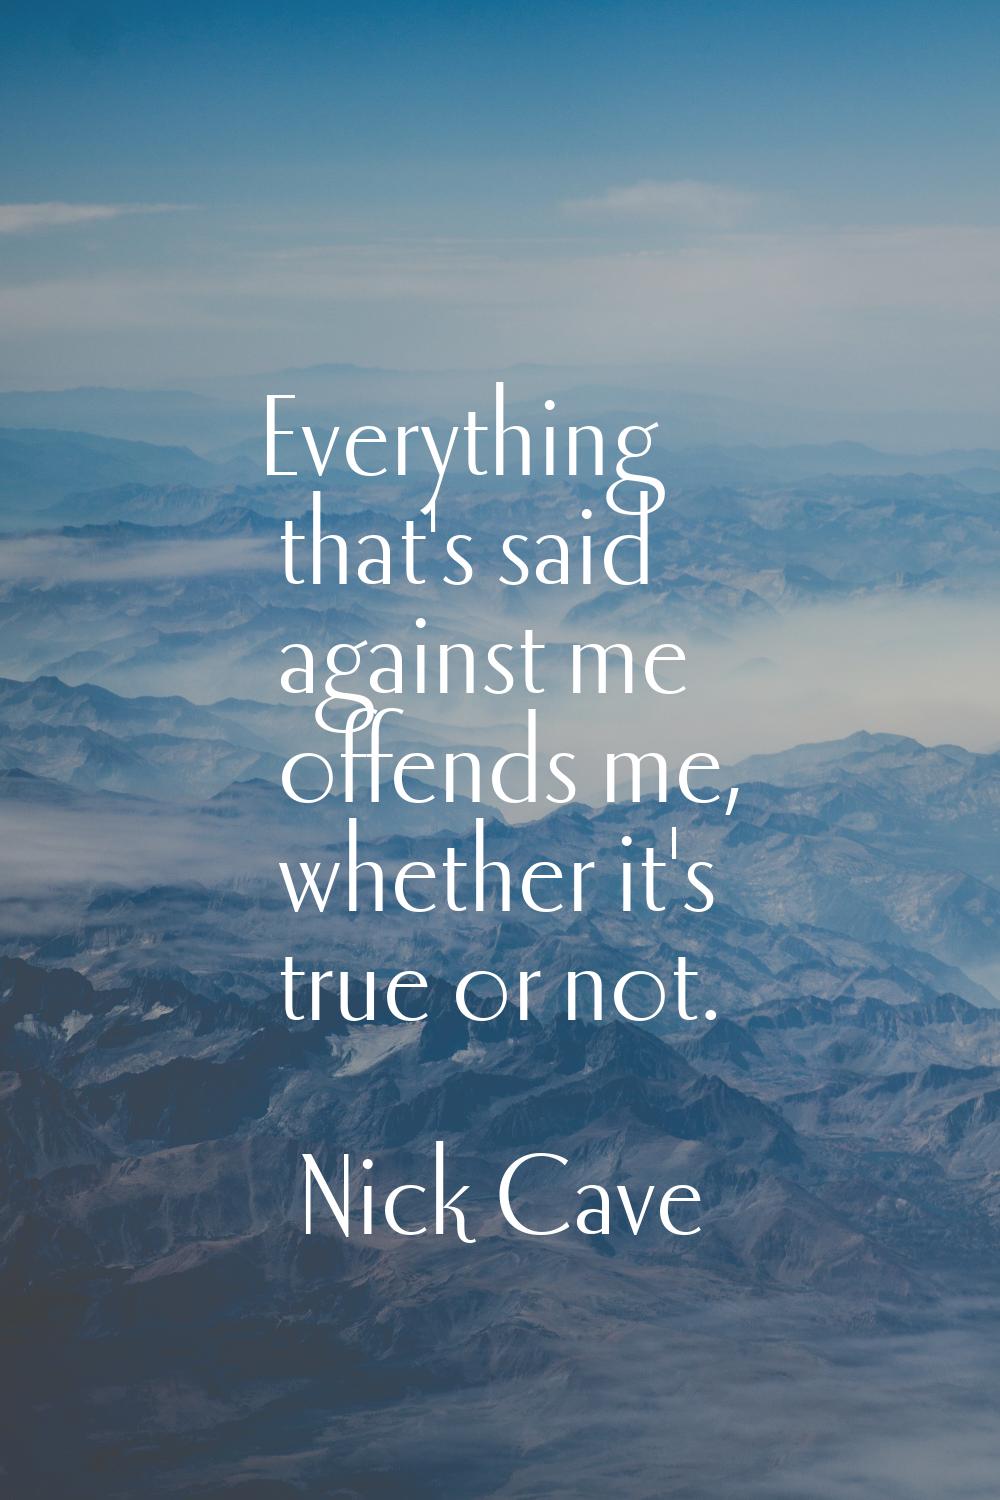 Everything that's said against me offends me, whether it's true or not.